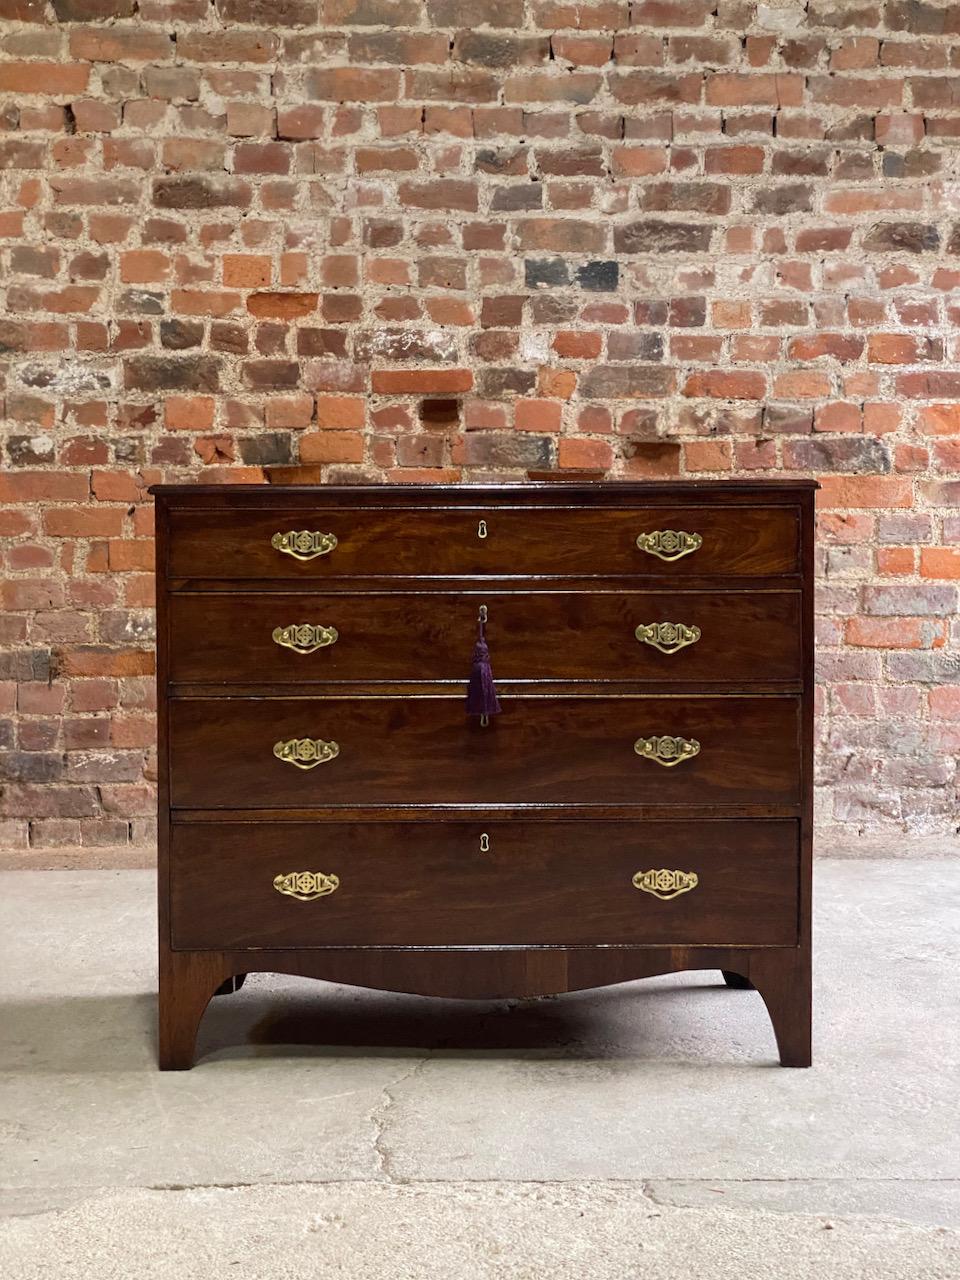 Antique George III Flamed Mahogany Chest of Drawers 19th, Century, circa 1810 For Sale 1